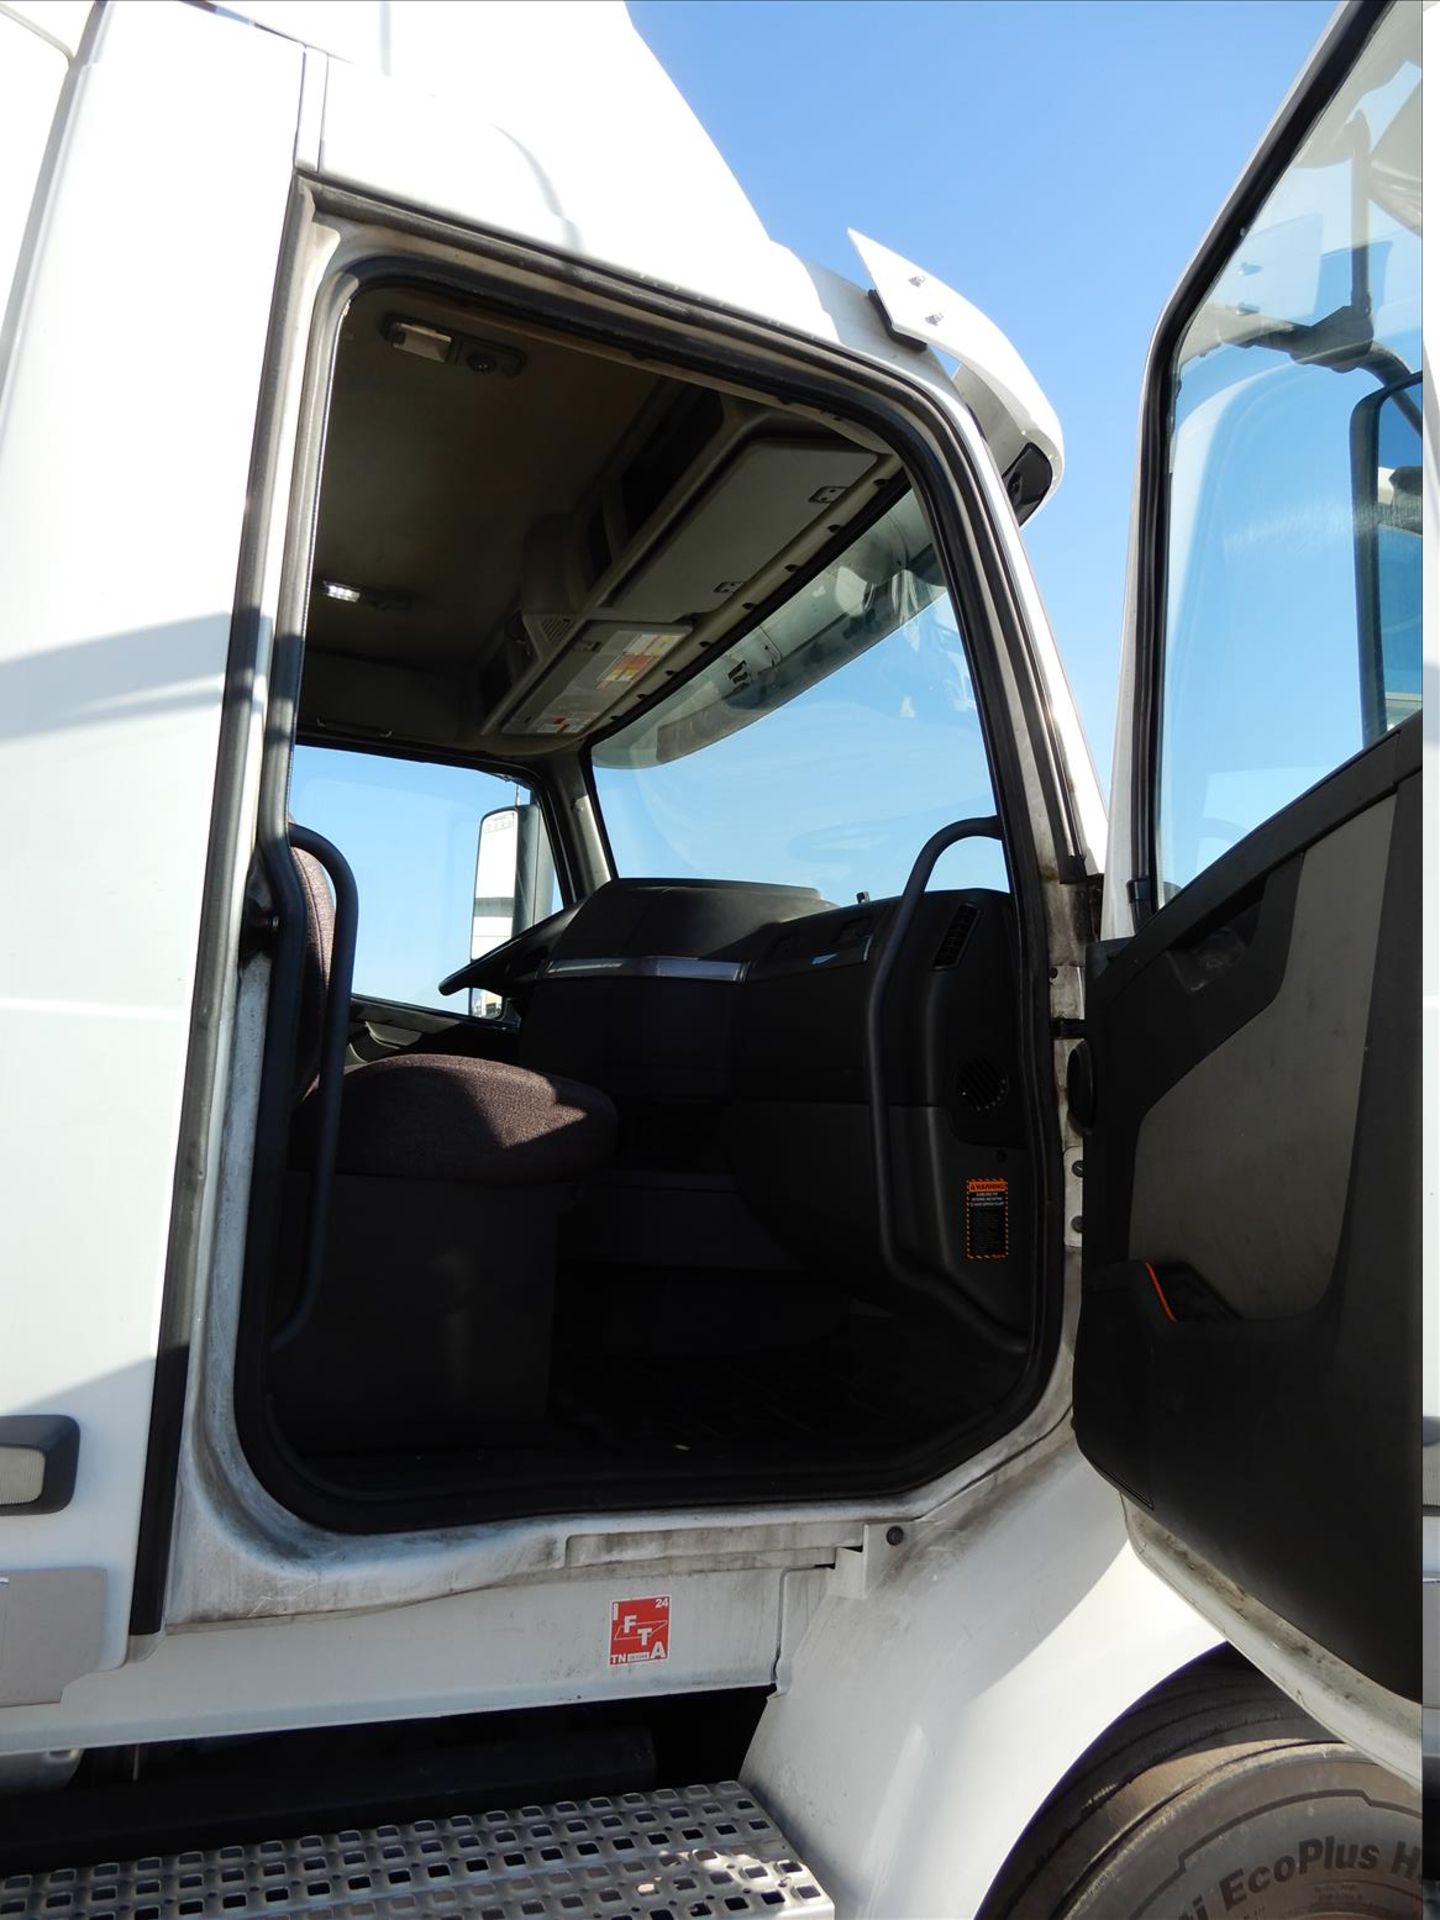 2019 Volvo VNR 300 Daycab Truck Tractor - Located in Indianapolis, IN - Image 34 of 61